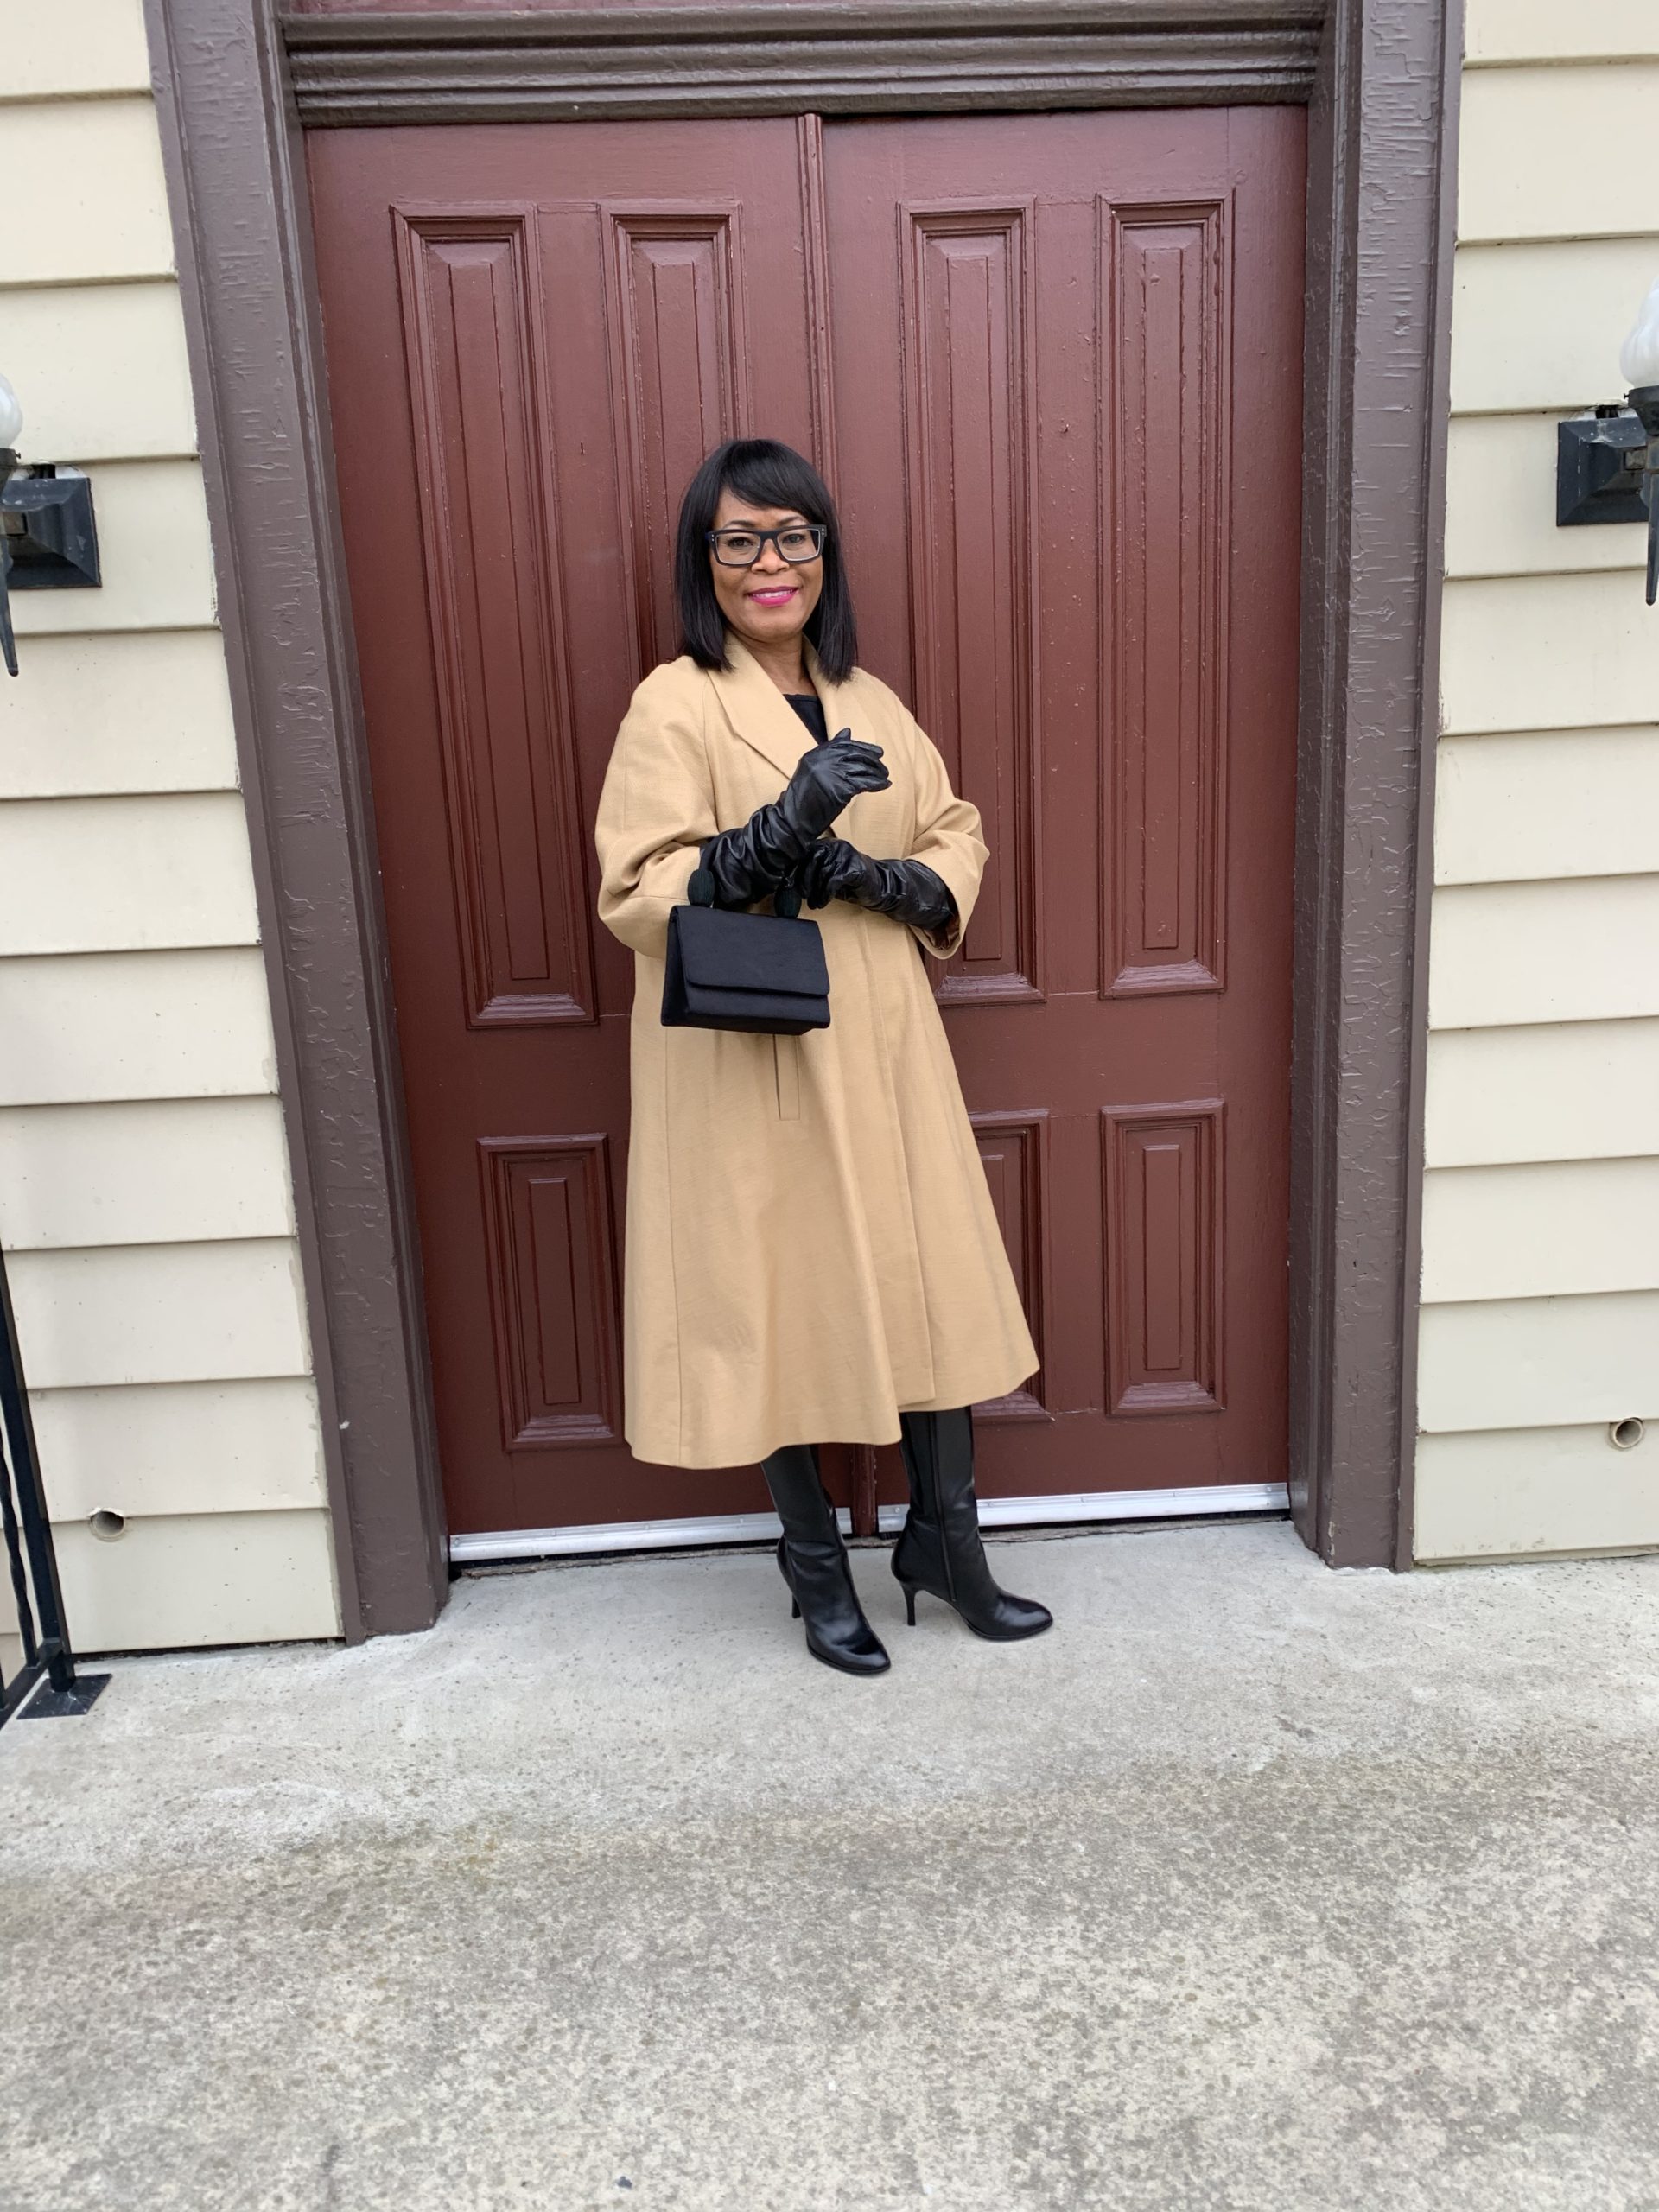 Lady-Like Accessories -long leather gloves and matching black purse and boots